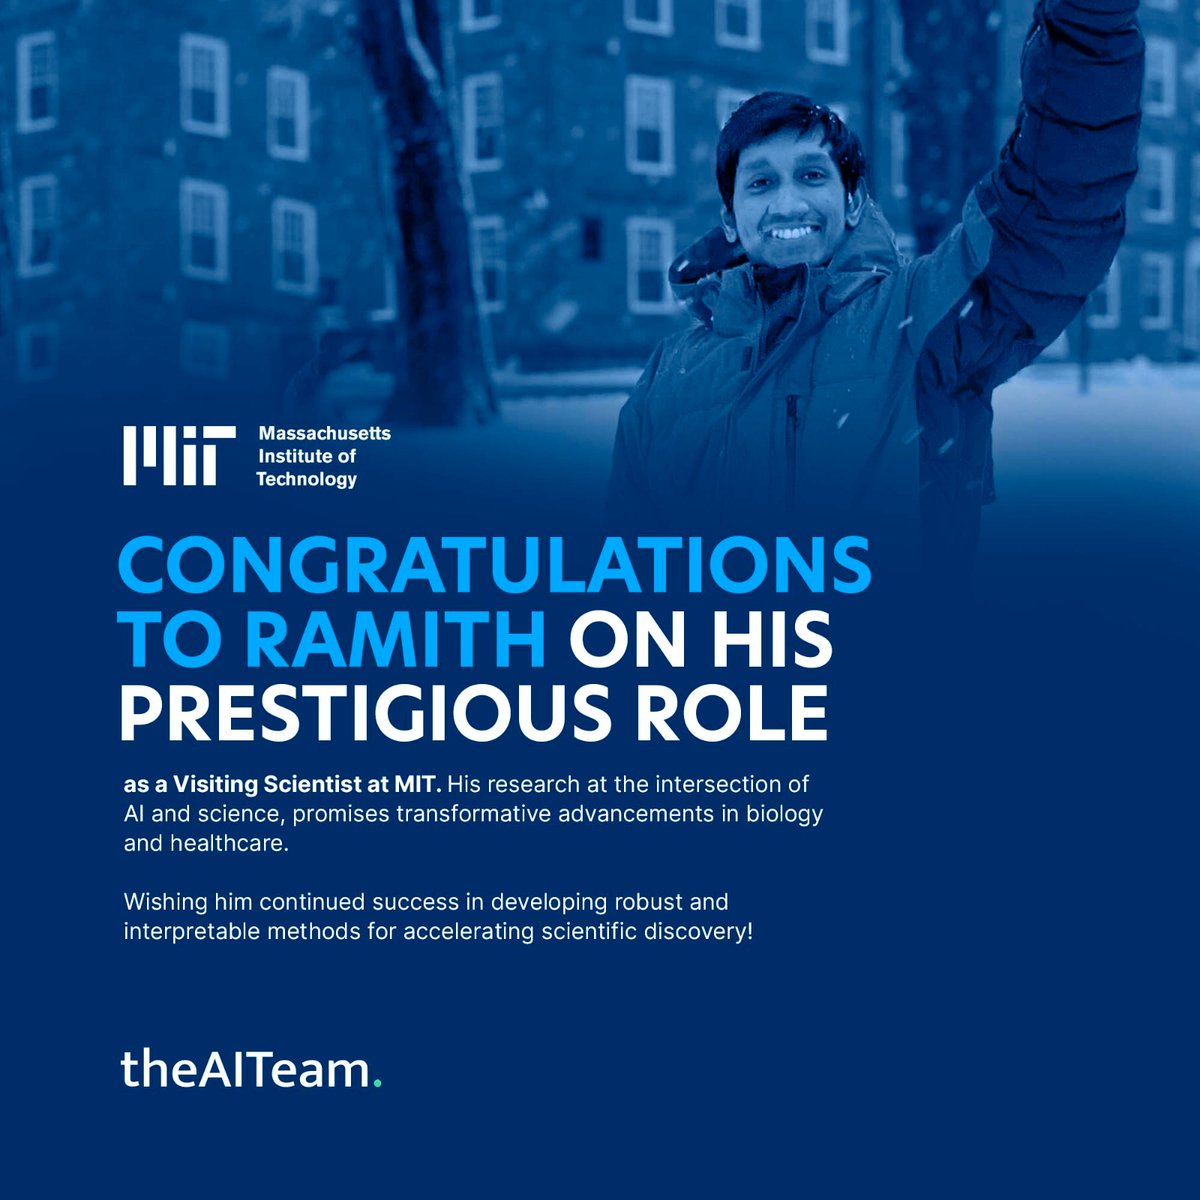 Congratulations, Ramith Hettiarachchi! Your role as a Visiting Scientist at MIT. Here's to your impactful research at the AI-science intersection, driving advancements in biology and healthcare 🎉

#TheAiTeam #AI #0xait #artficialintelligence